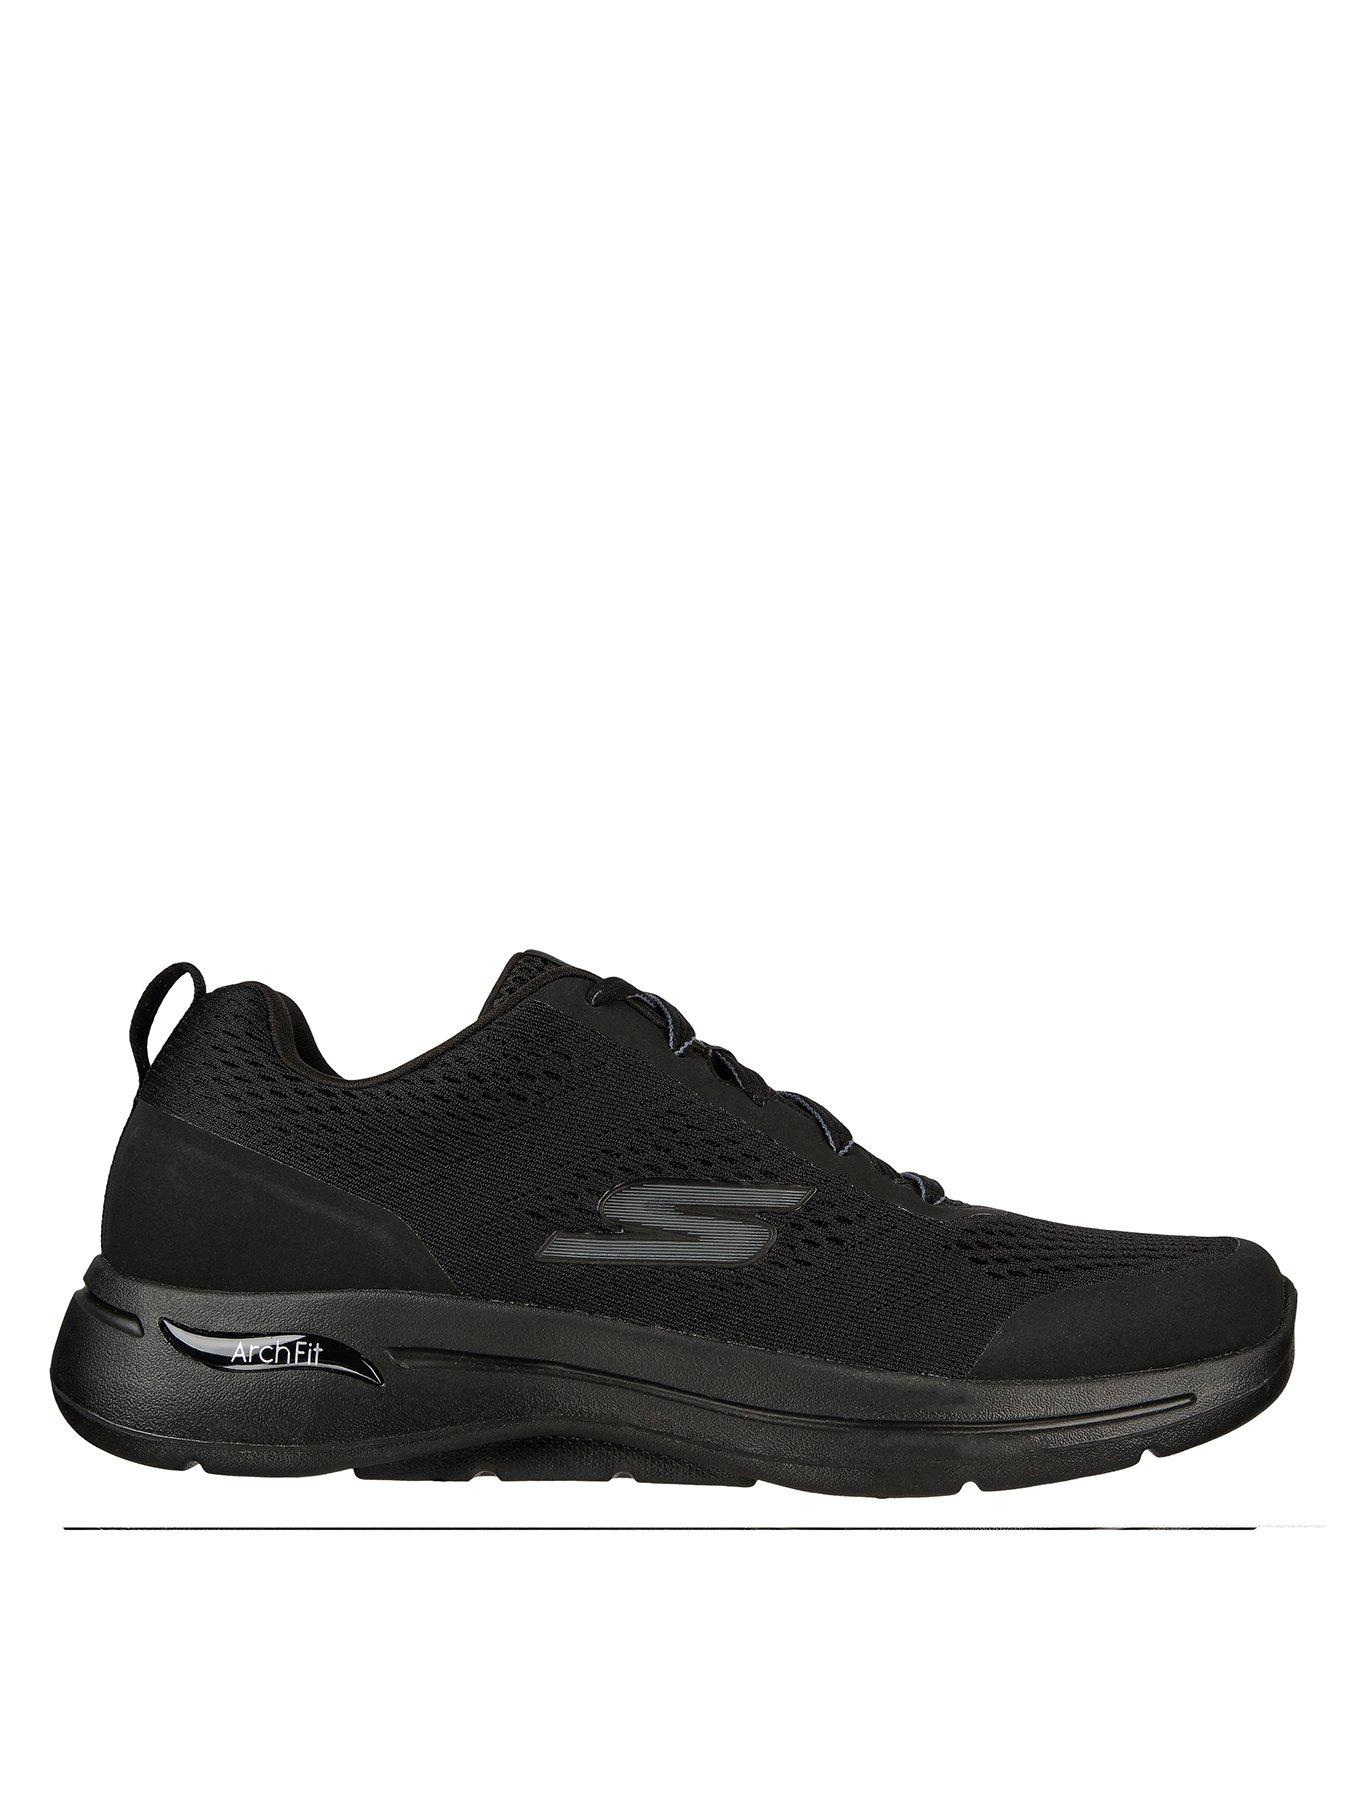 Skechers Go Walk Arch Fit Arch Fit Athletic Engineered Mesh Lace Up ...